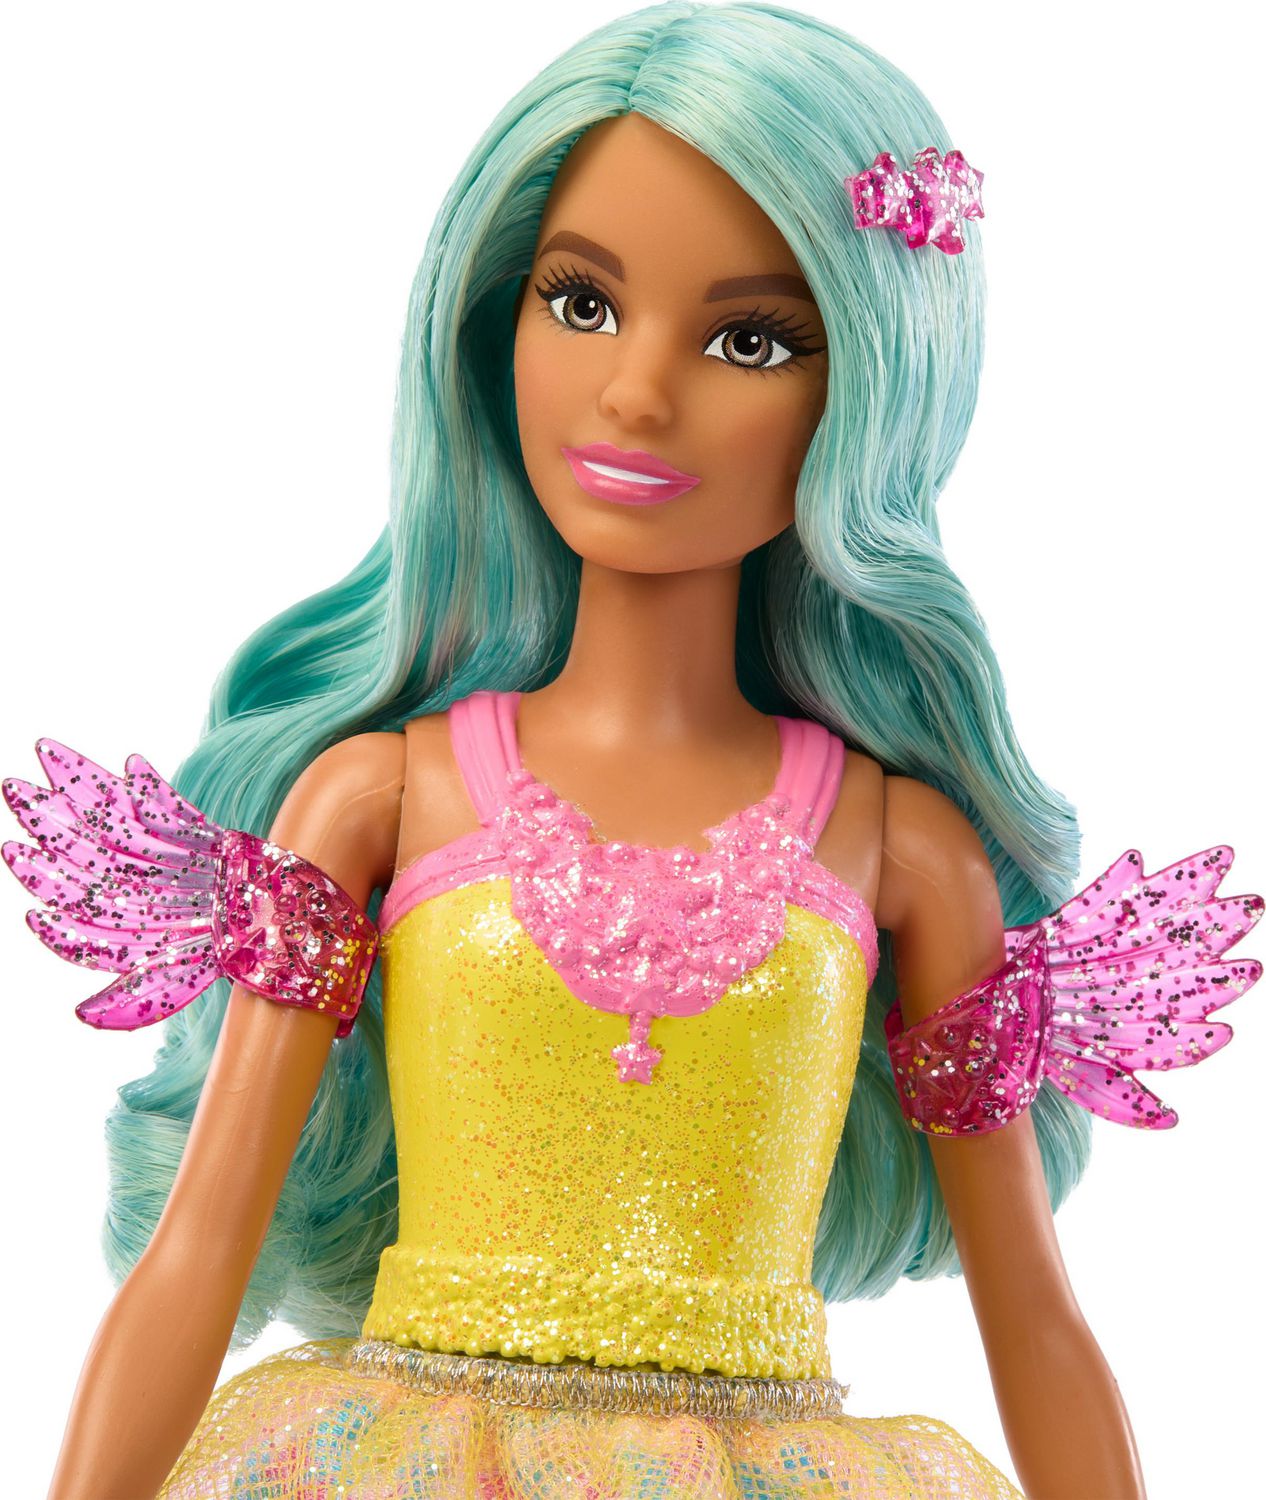 Barbie Doll with Fairytale Outfit and Pet, Teresa from Barbie A 